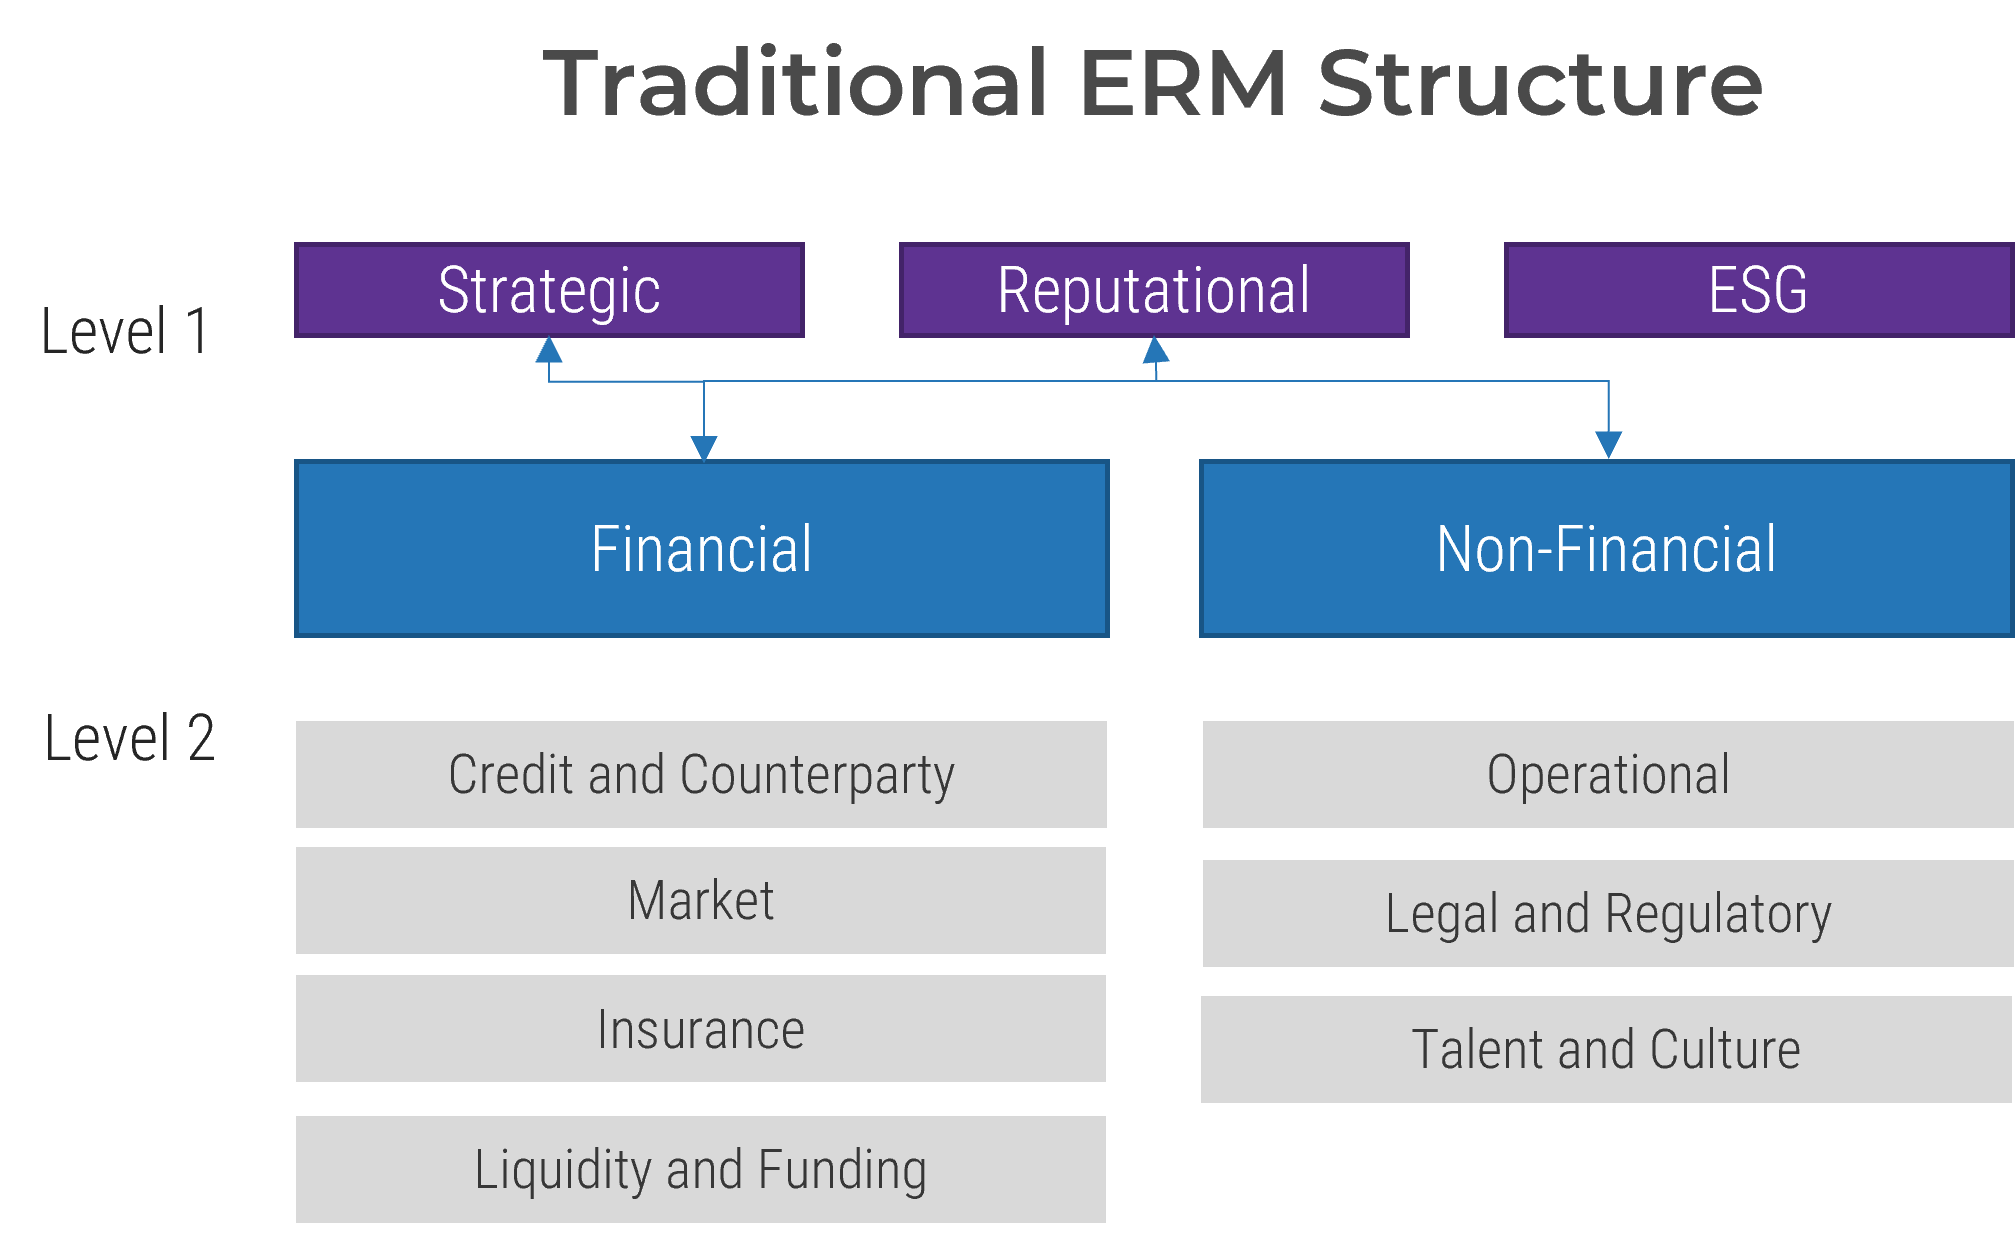 The image contains a screenshot of a diagram of the Traditional ERM Structure.